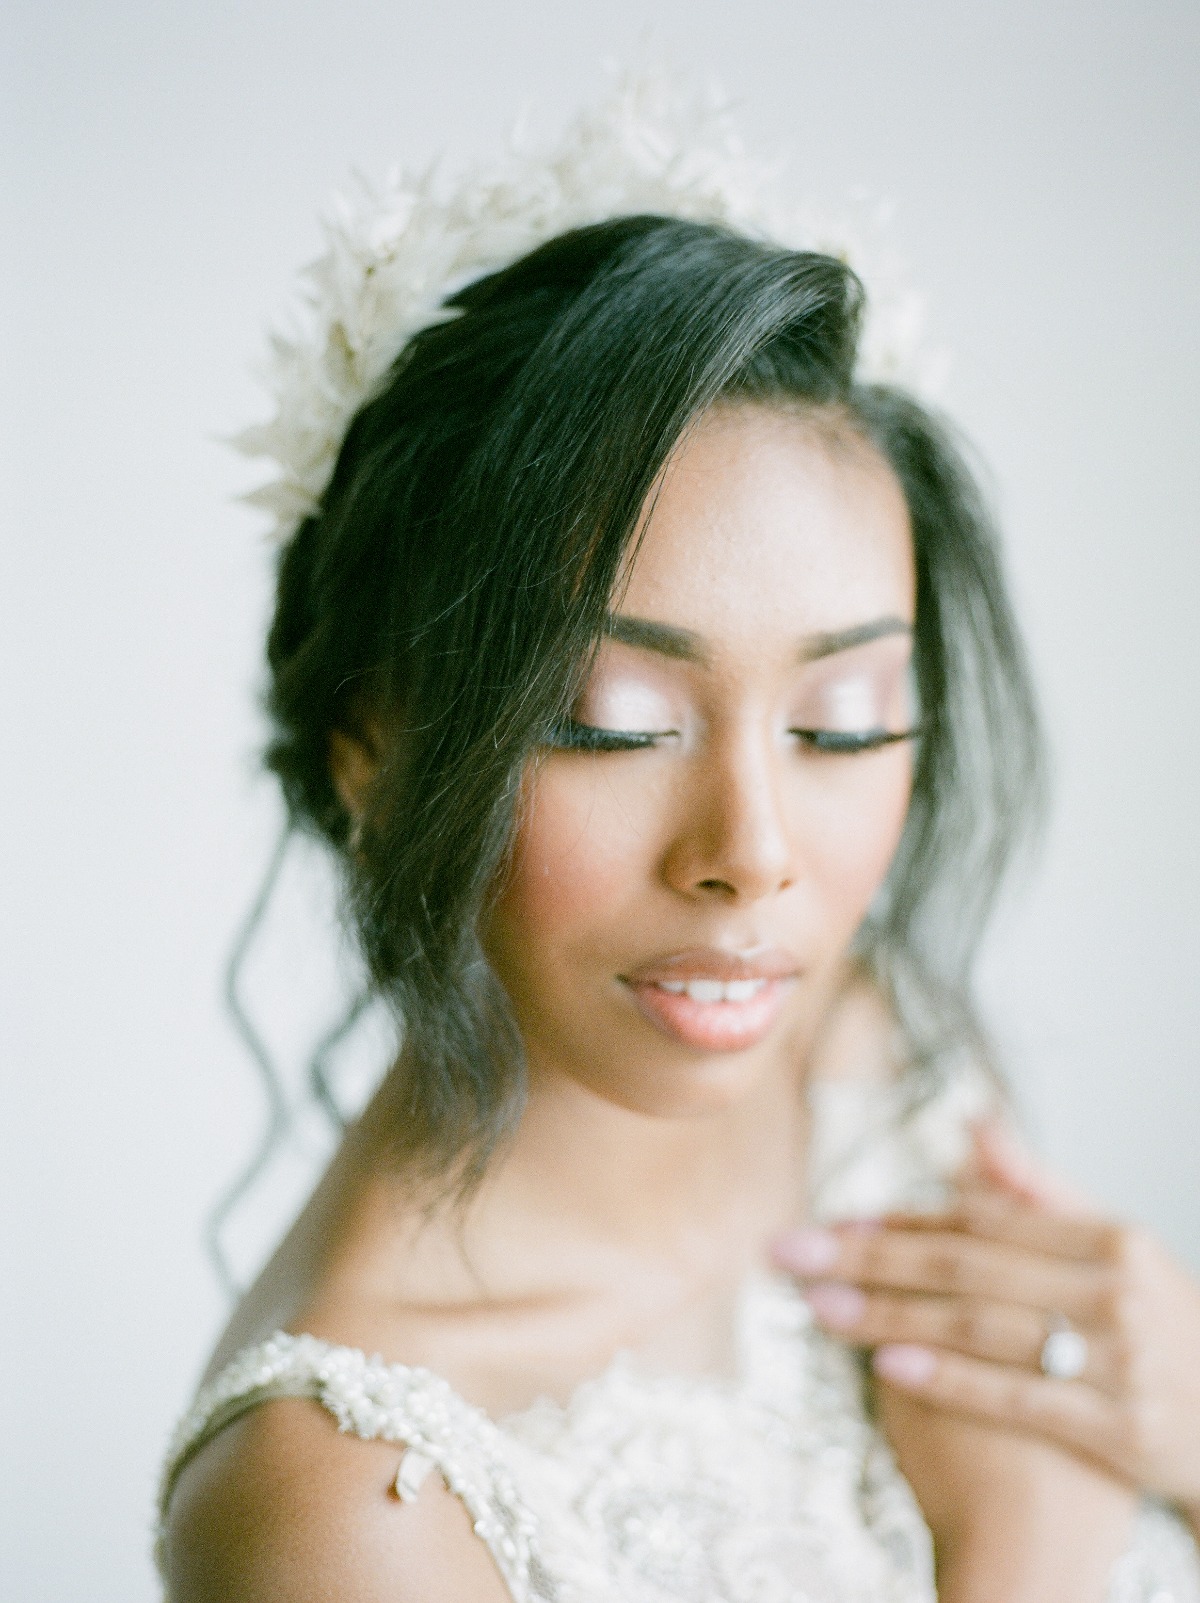 We Are Enough, Whole And Worthy - An Inspiration Styled Shoot Created By Women For Women